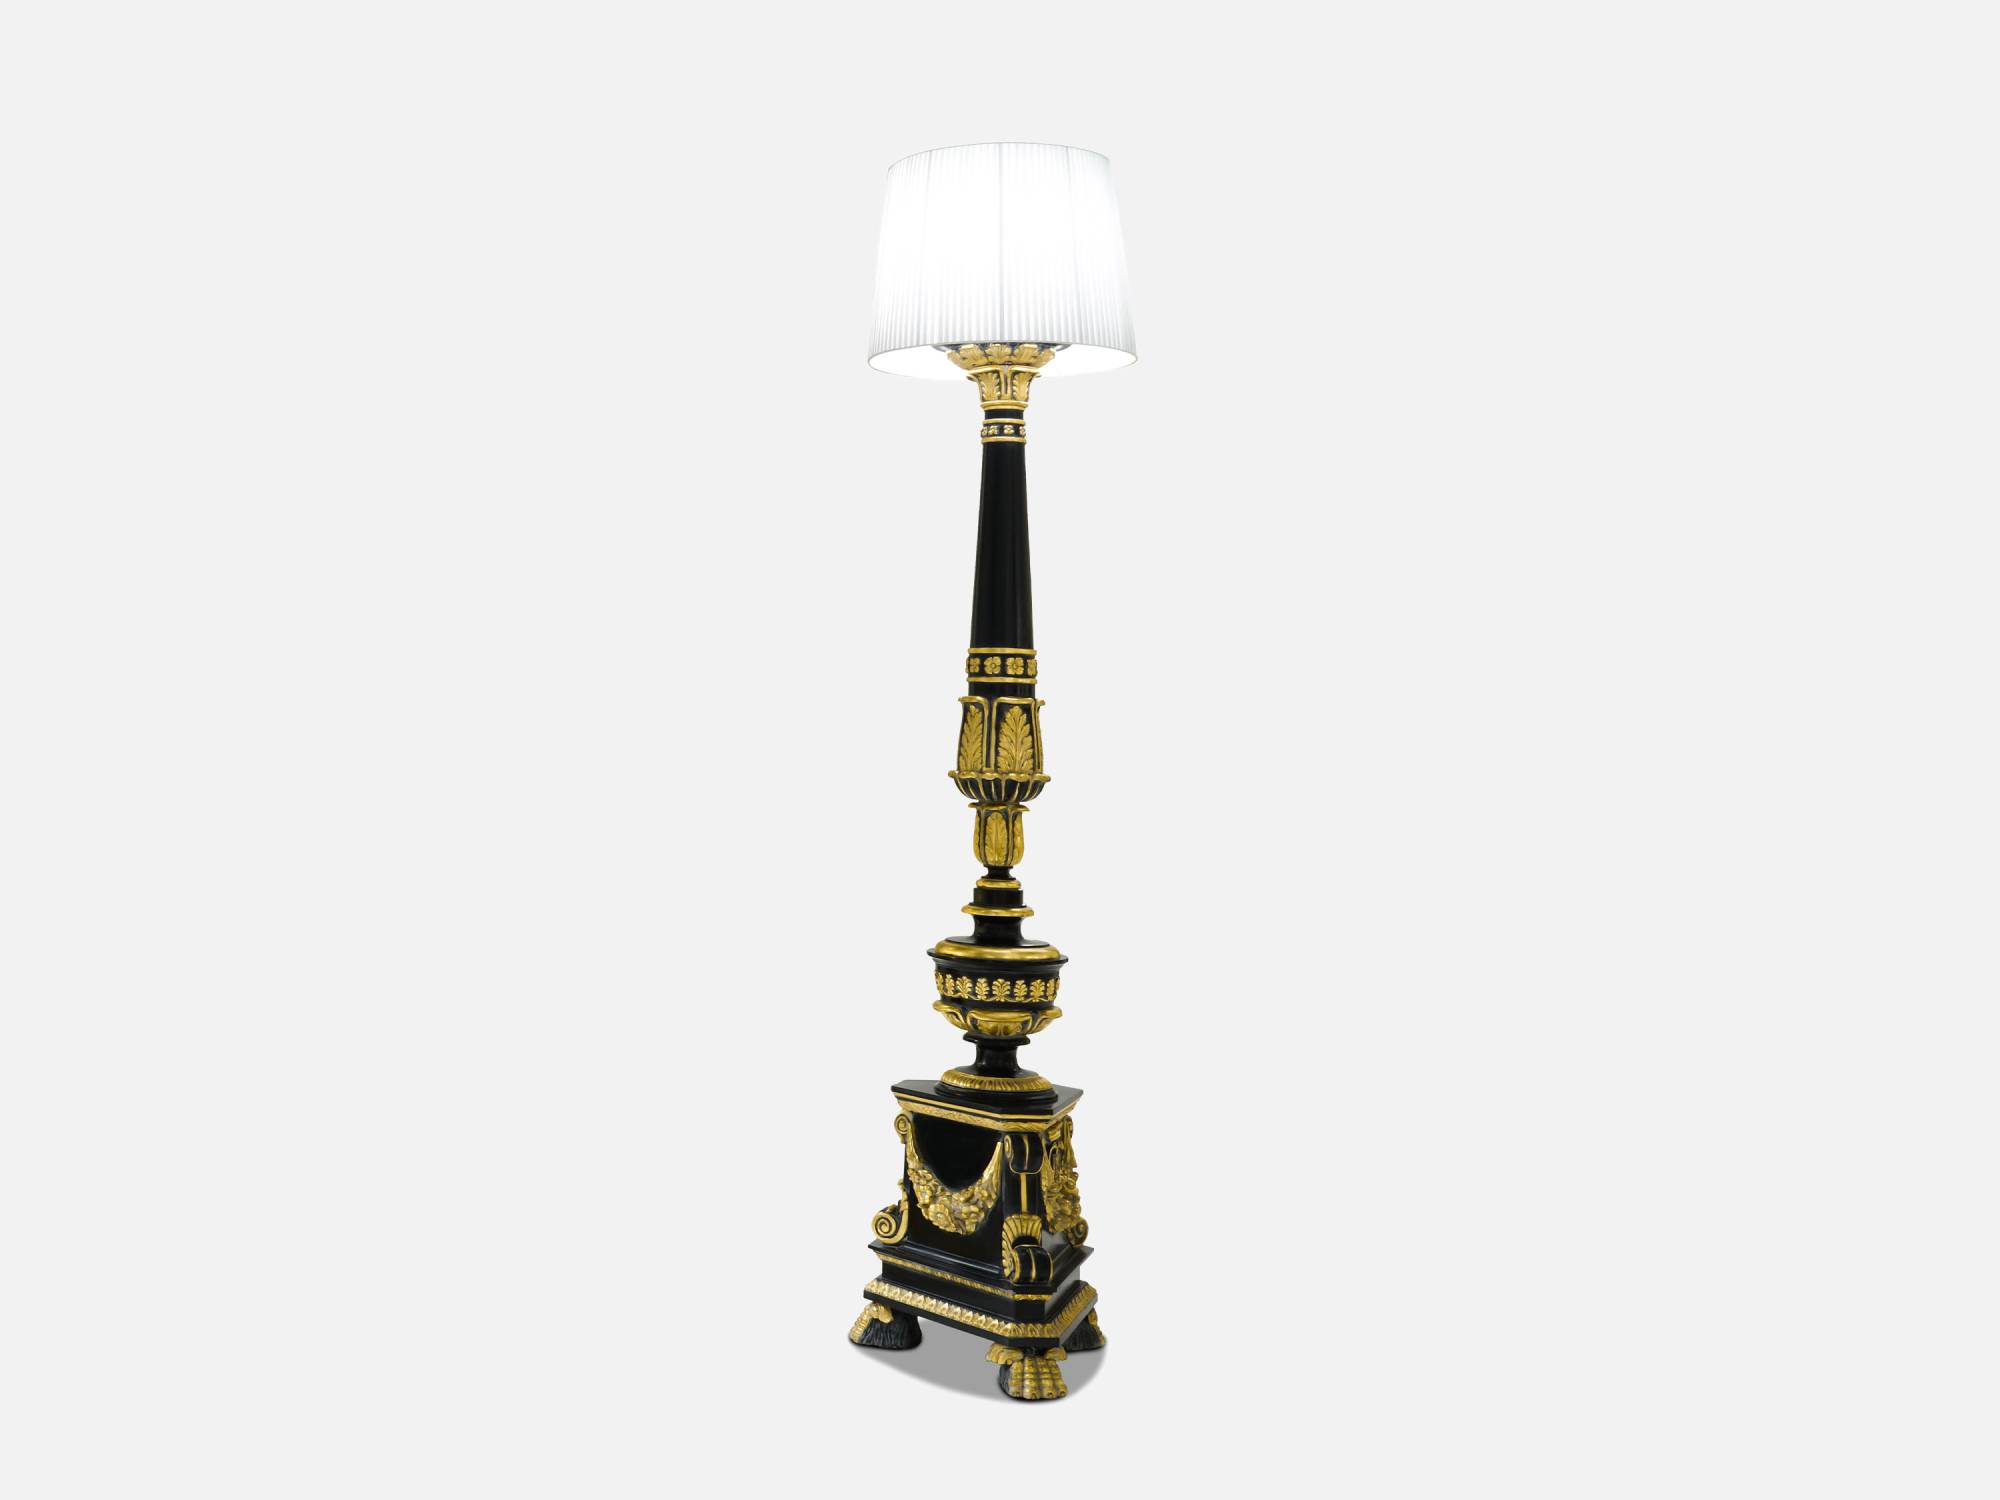 ART. 2132 – The elegance of luxury classic Lighting made in Italy by C.G. Capelletti.